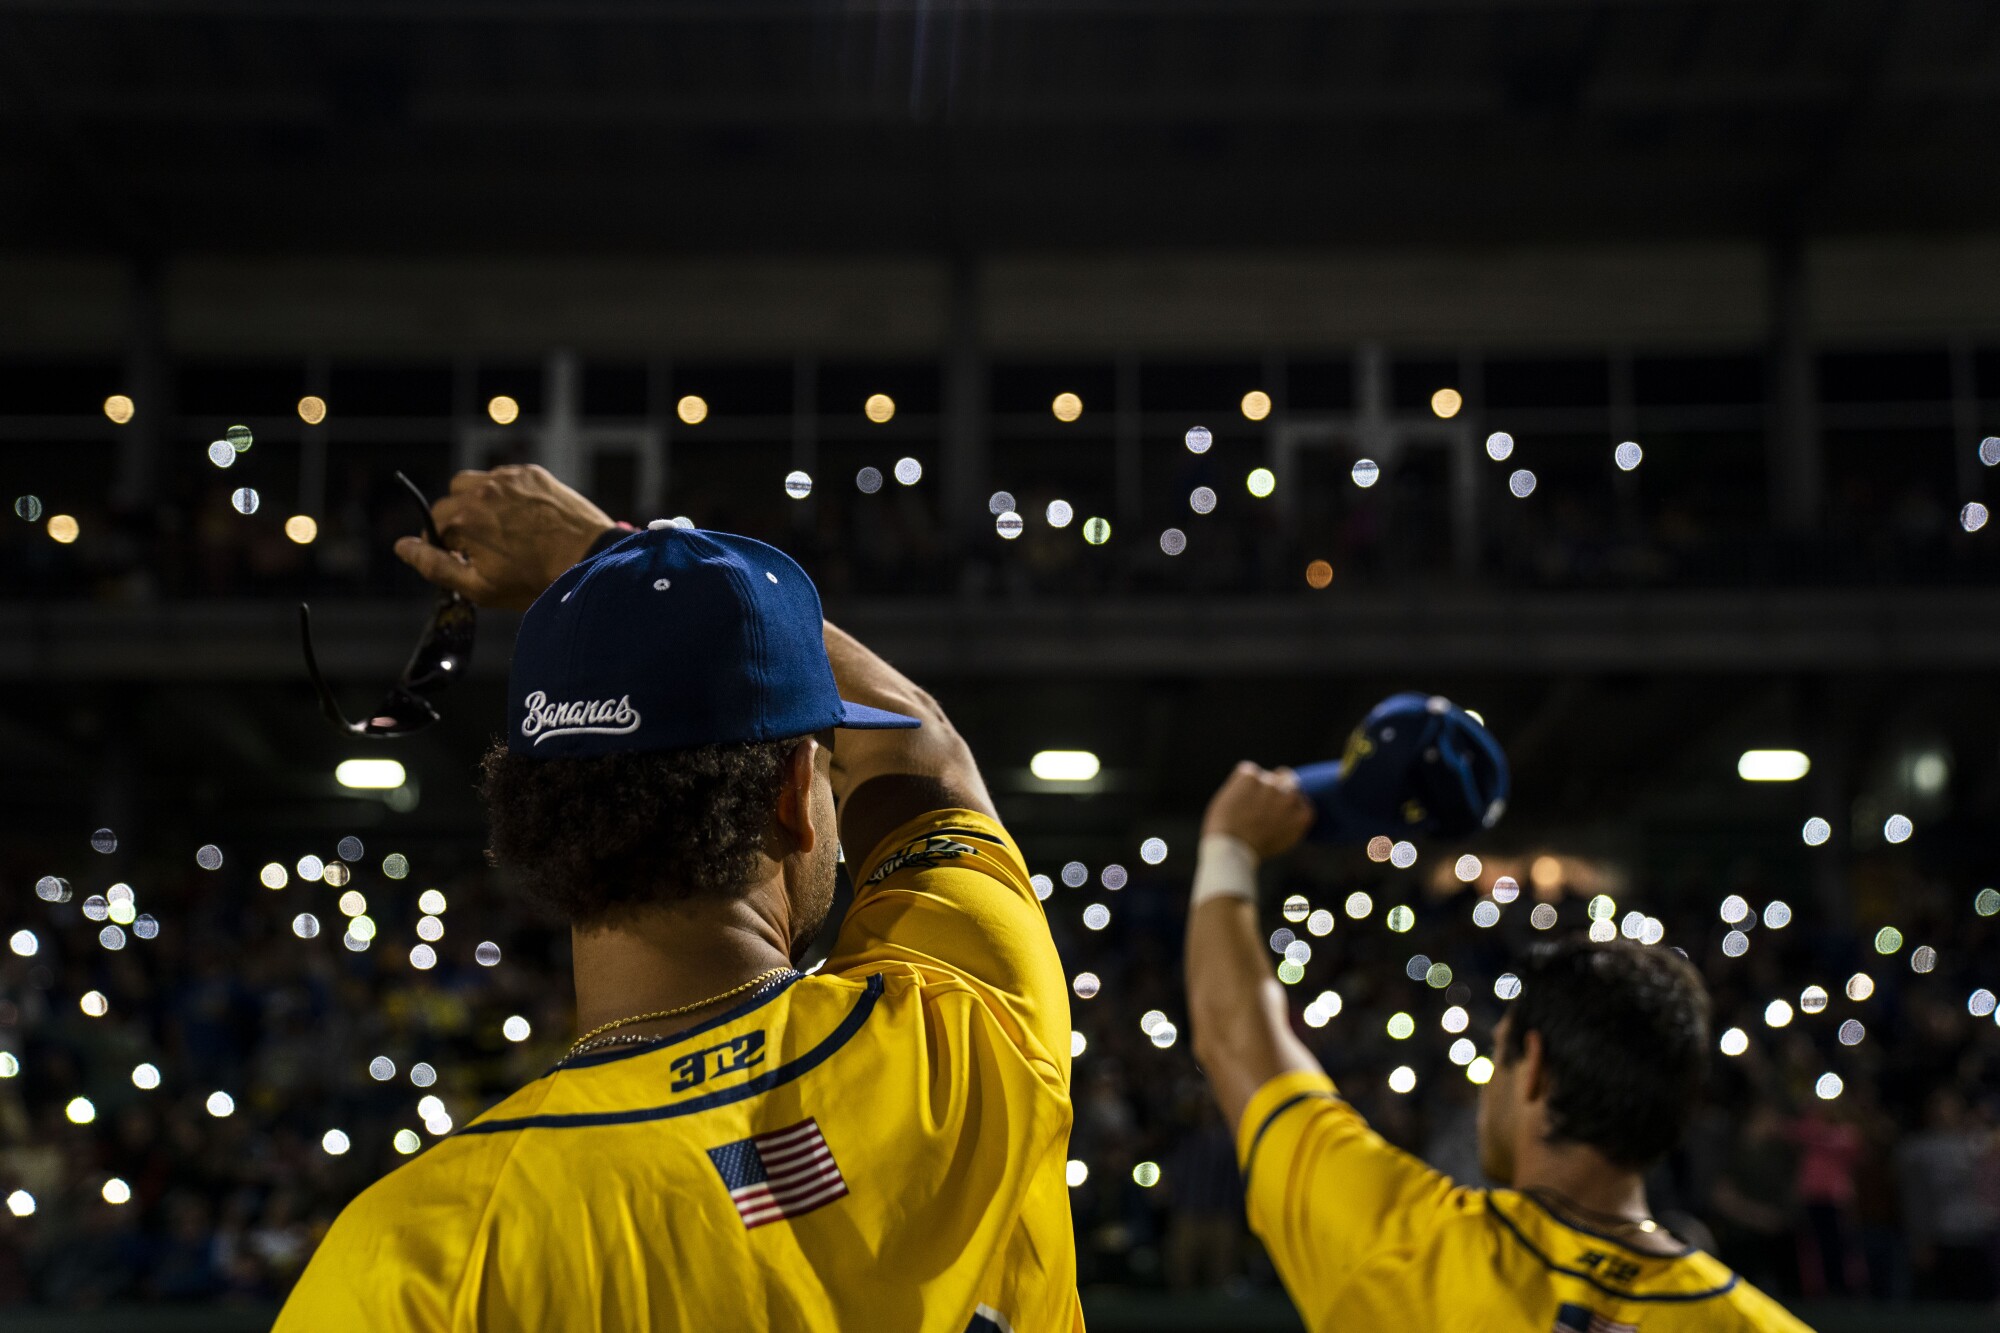 During the seventh inning, Savannah Bananas fans wave their cellphones during the playing of Coldplay's 